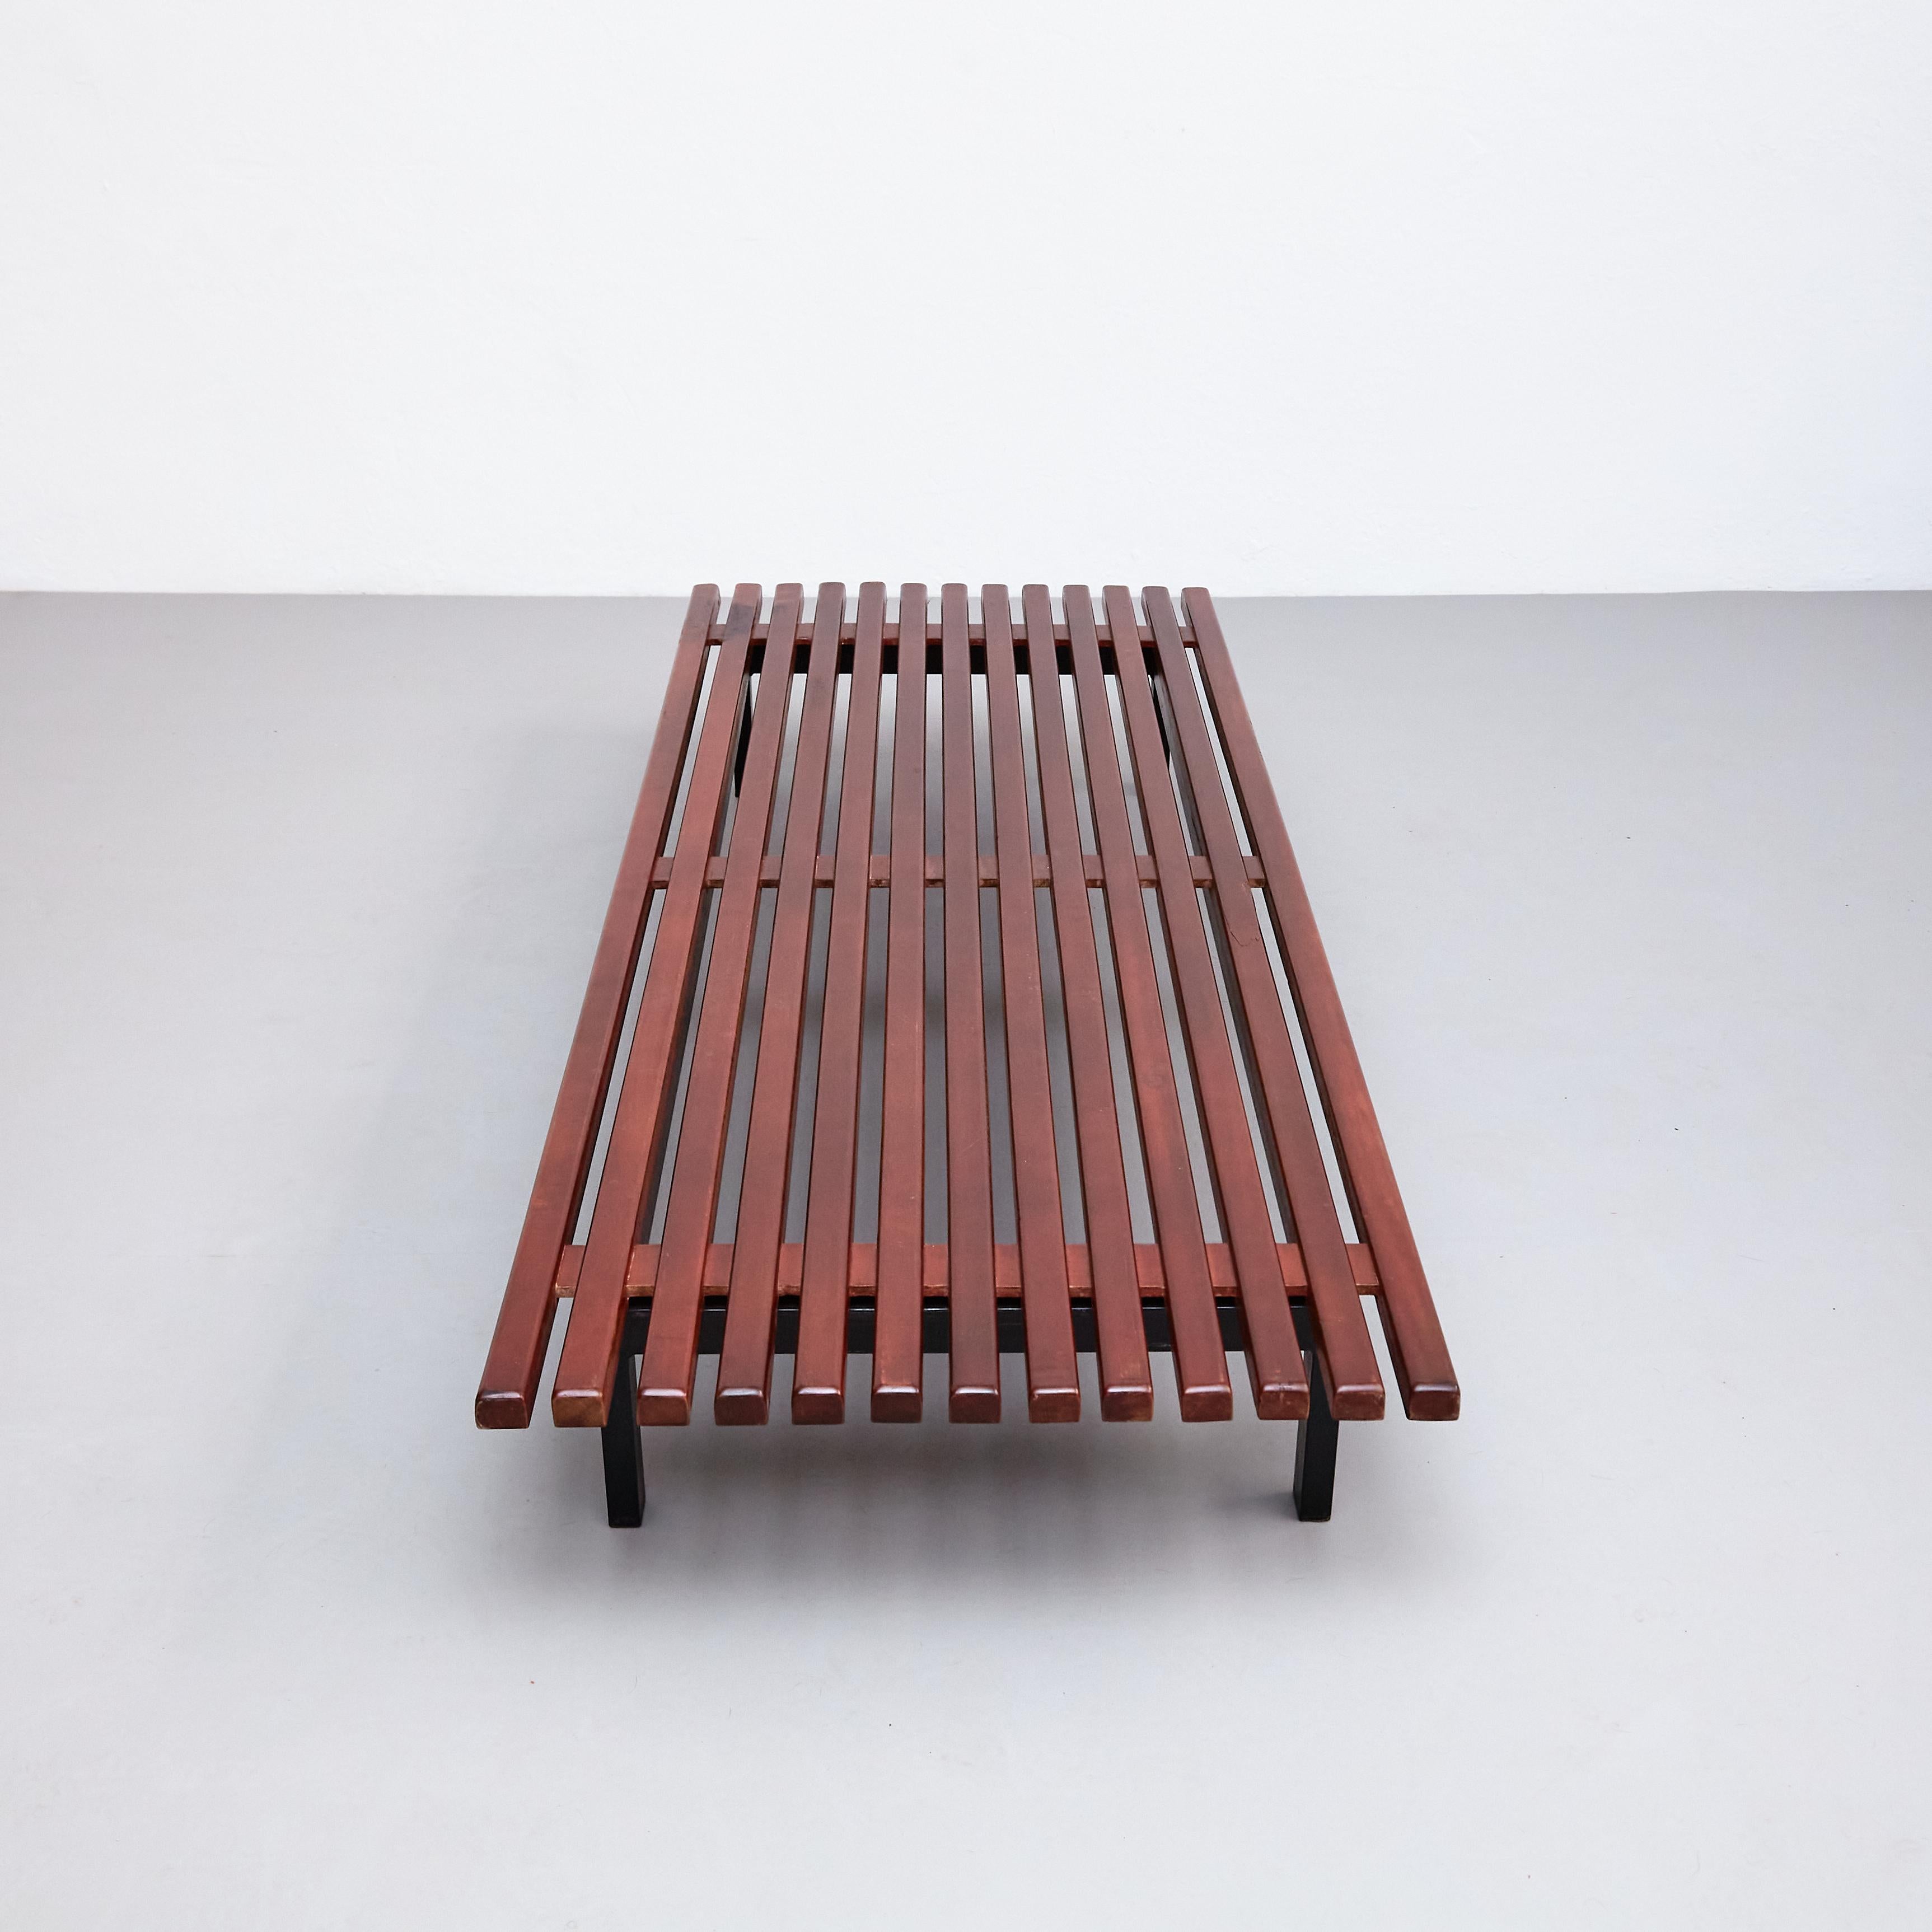 Charlotte Perriand Mid-Century Modern Wood Metal Cansado Bench, circa 1950 In Good Condition For Sale In Barcelona, Barcelona